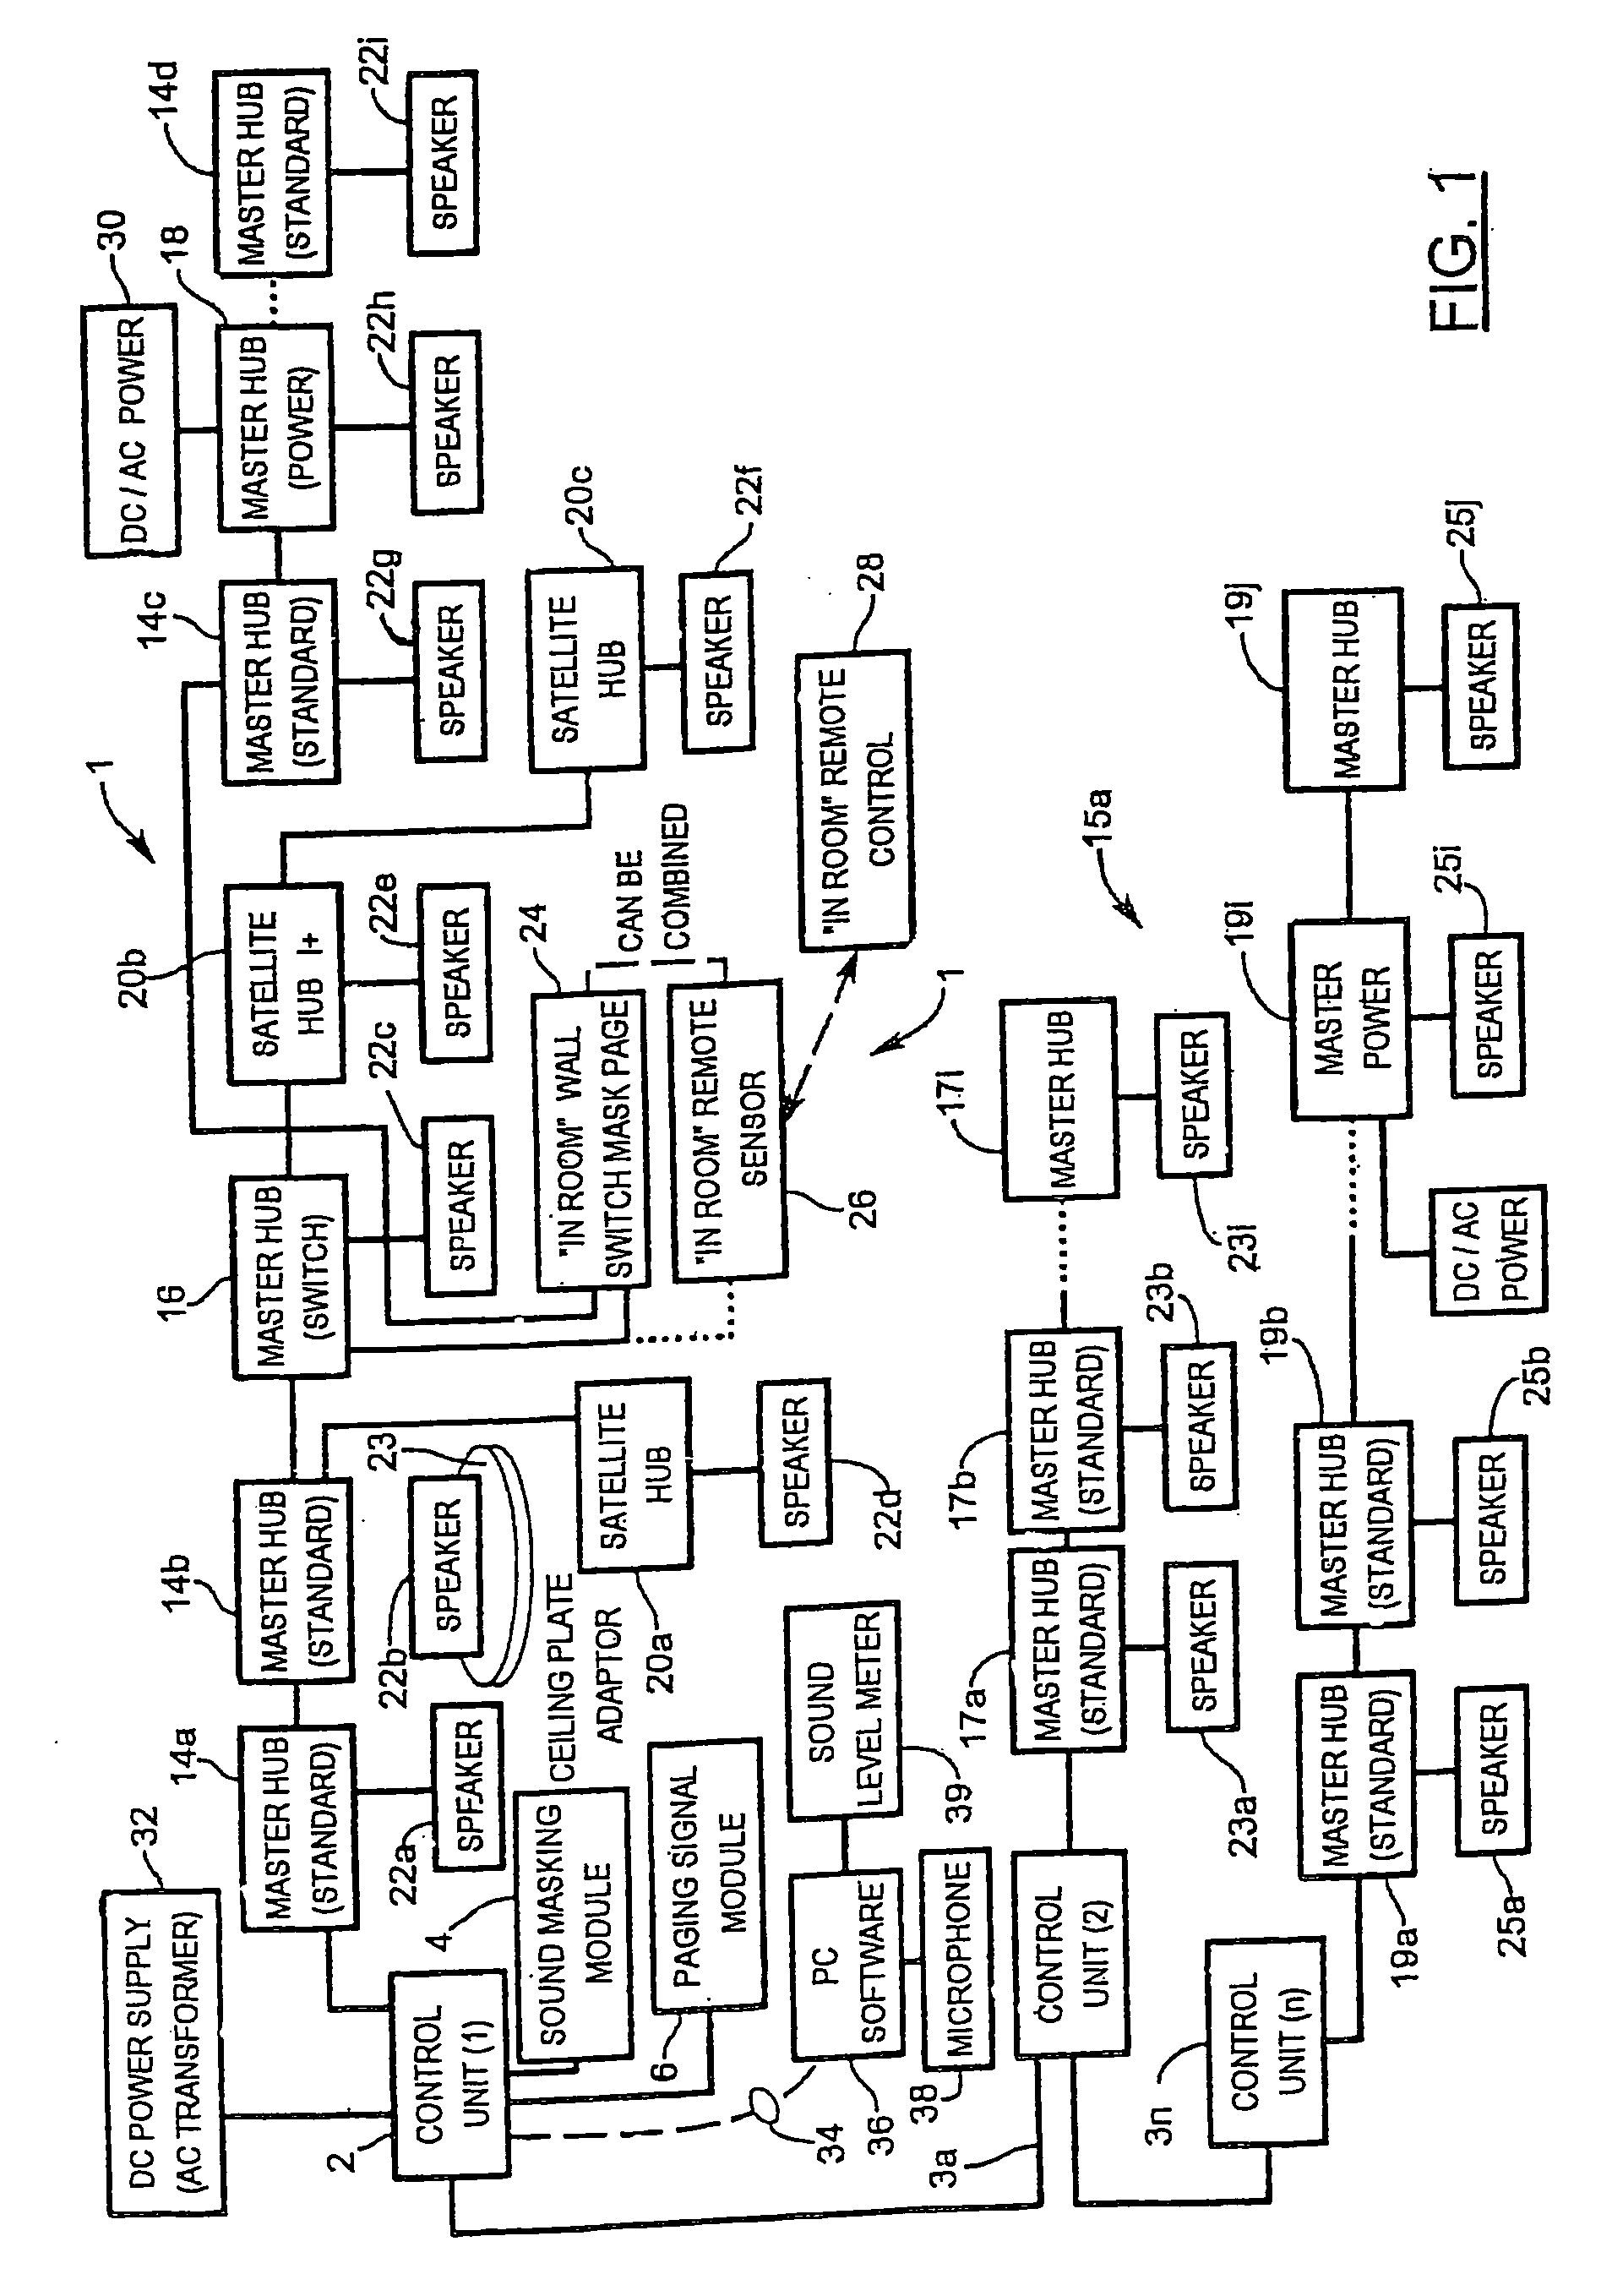 Networked sound masking system with centralized sound masking generation